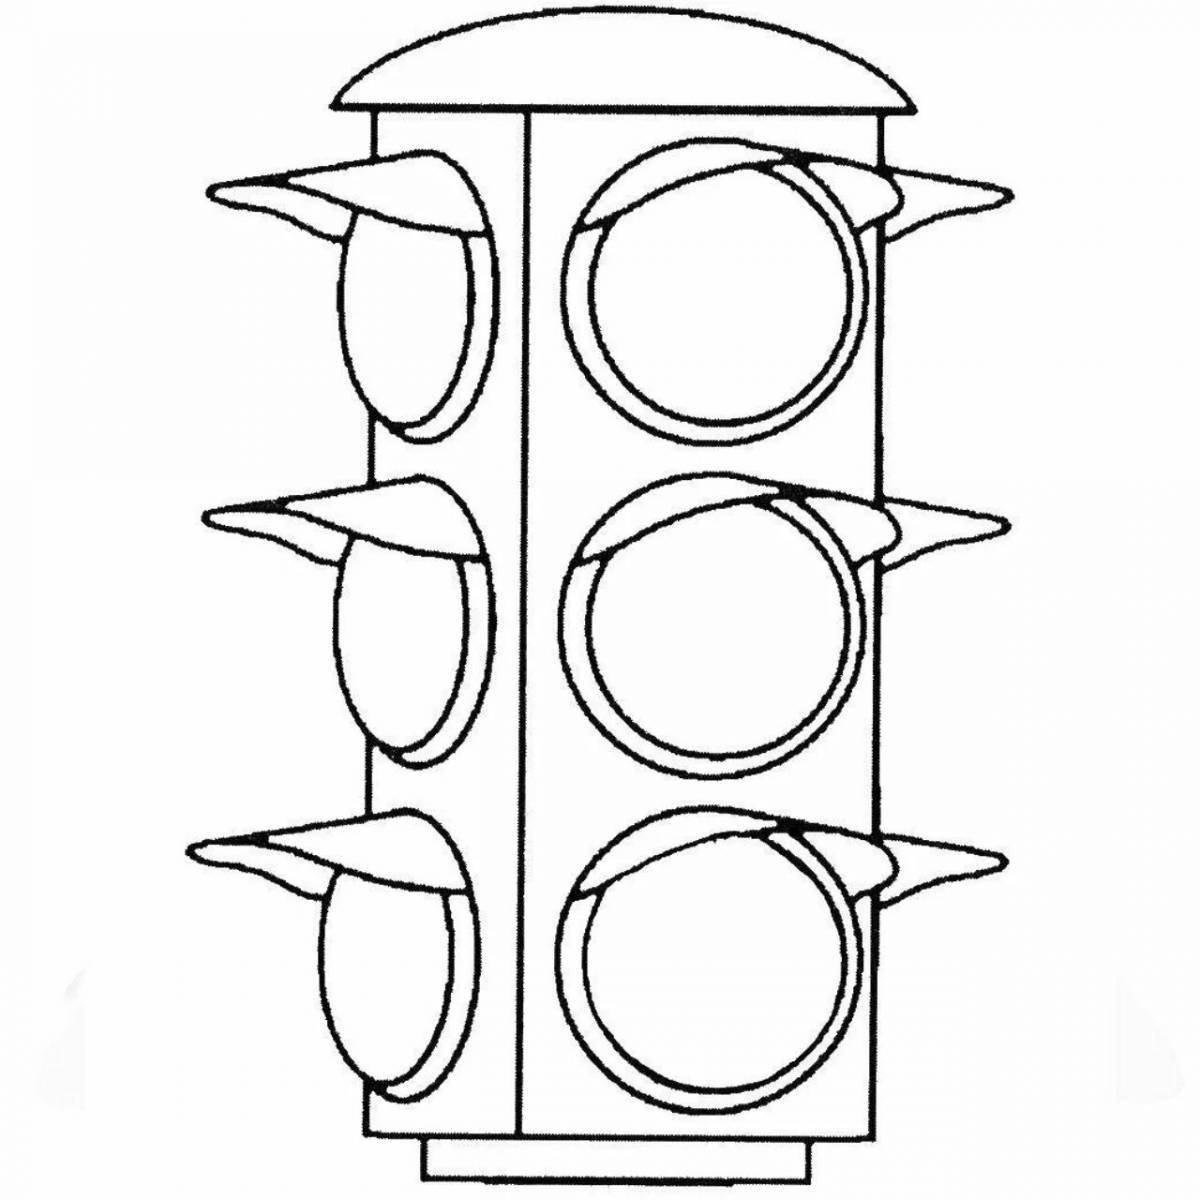 Coloring page funny traffic light